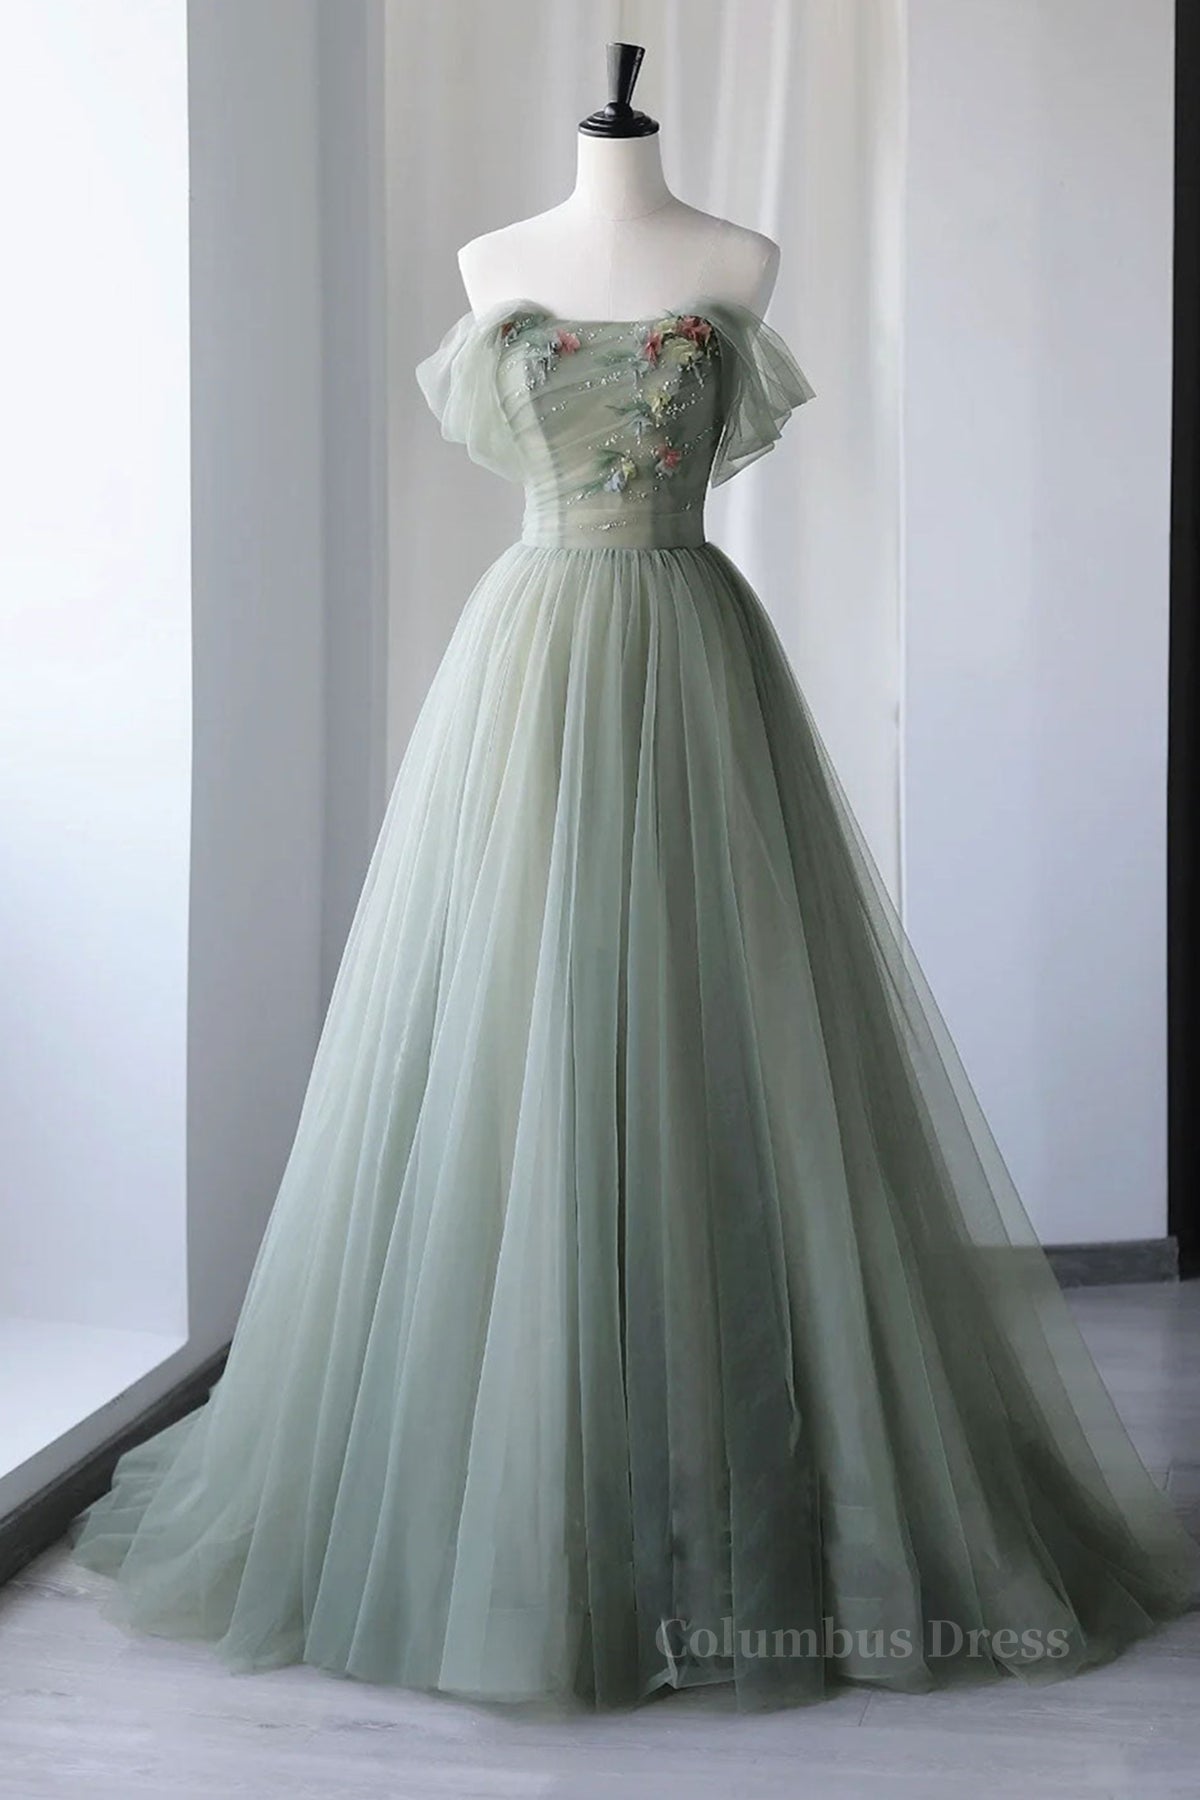 Bridesmaid Dresses Long Sleeves, Off Shoulder Green Tulle Floral Long Prom Dresses, Off the Shoulder Green Formal Evening Dresses with 3D Flowers